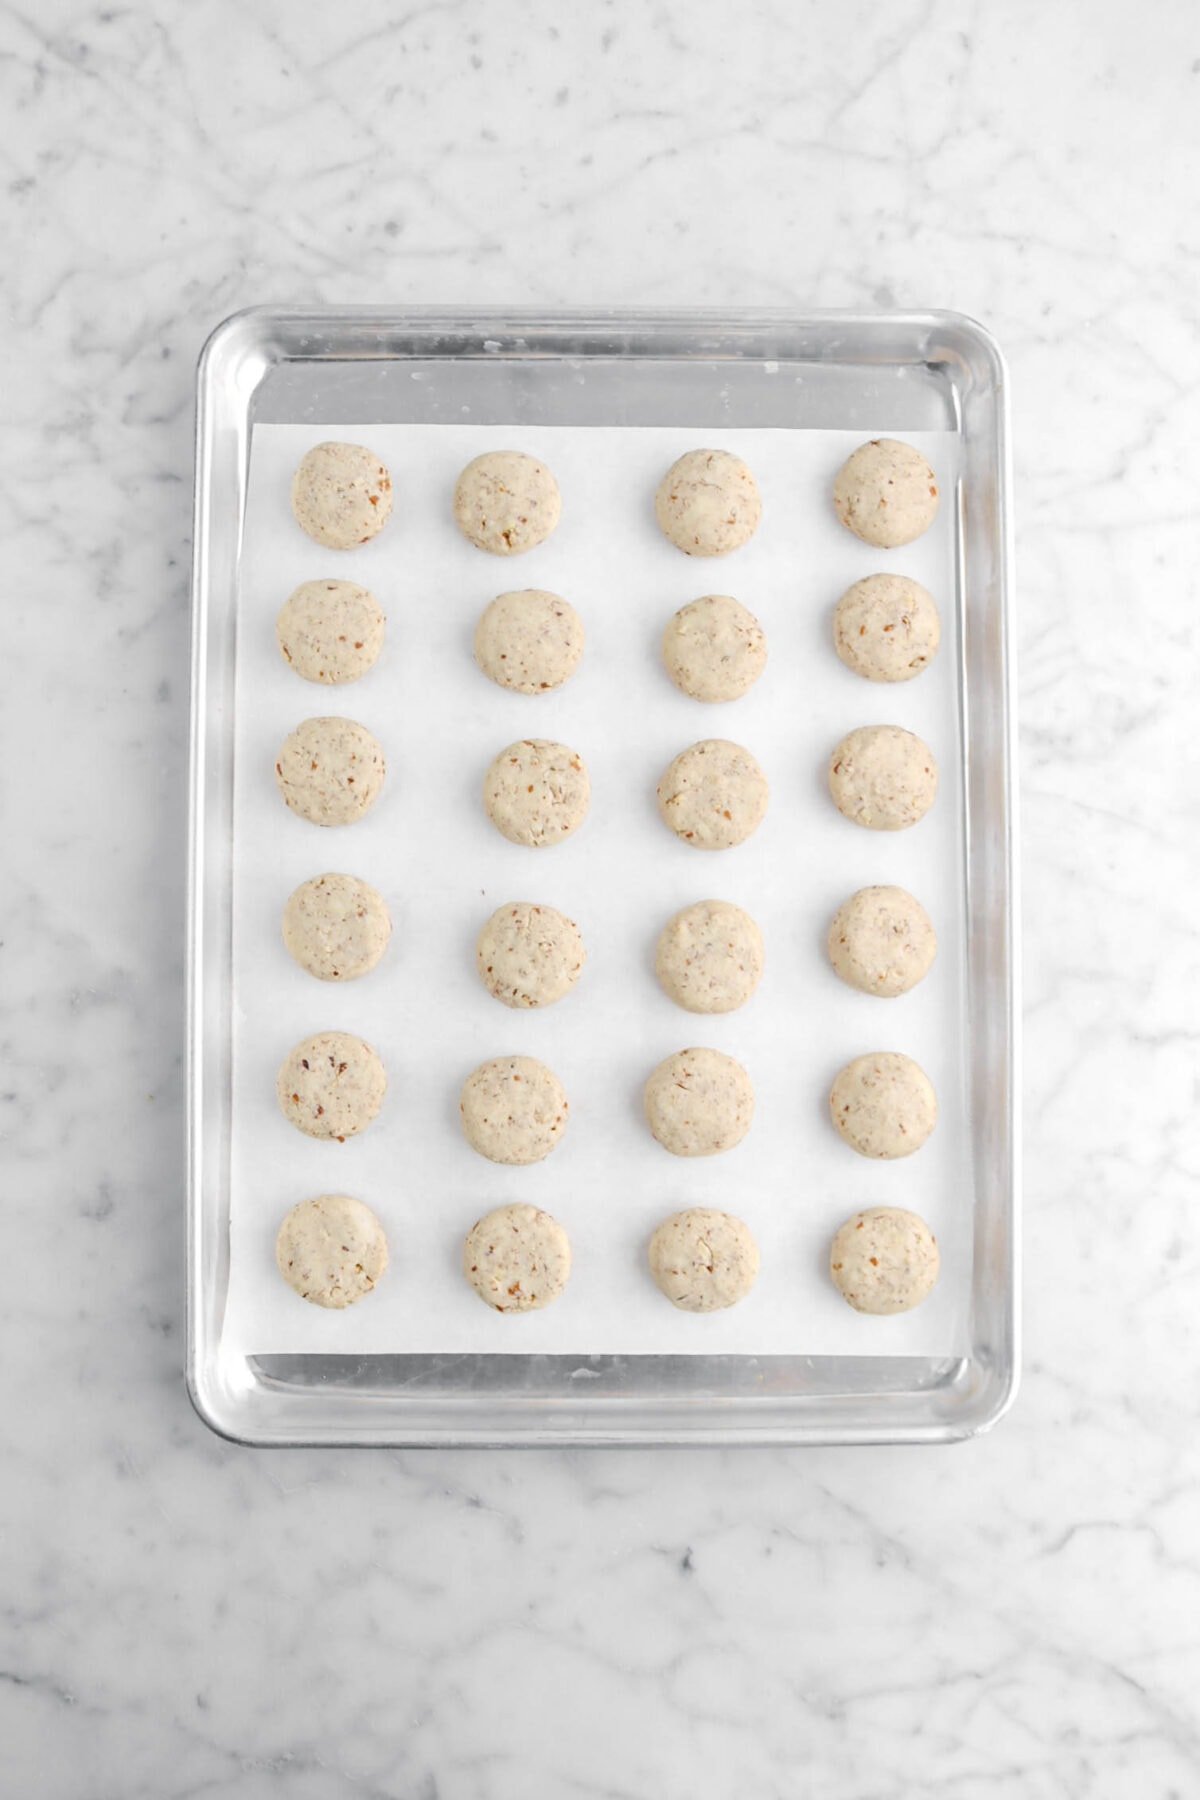 baked cookies on lined sheet pan